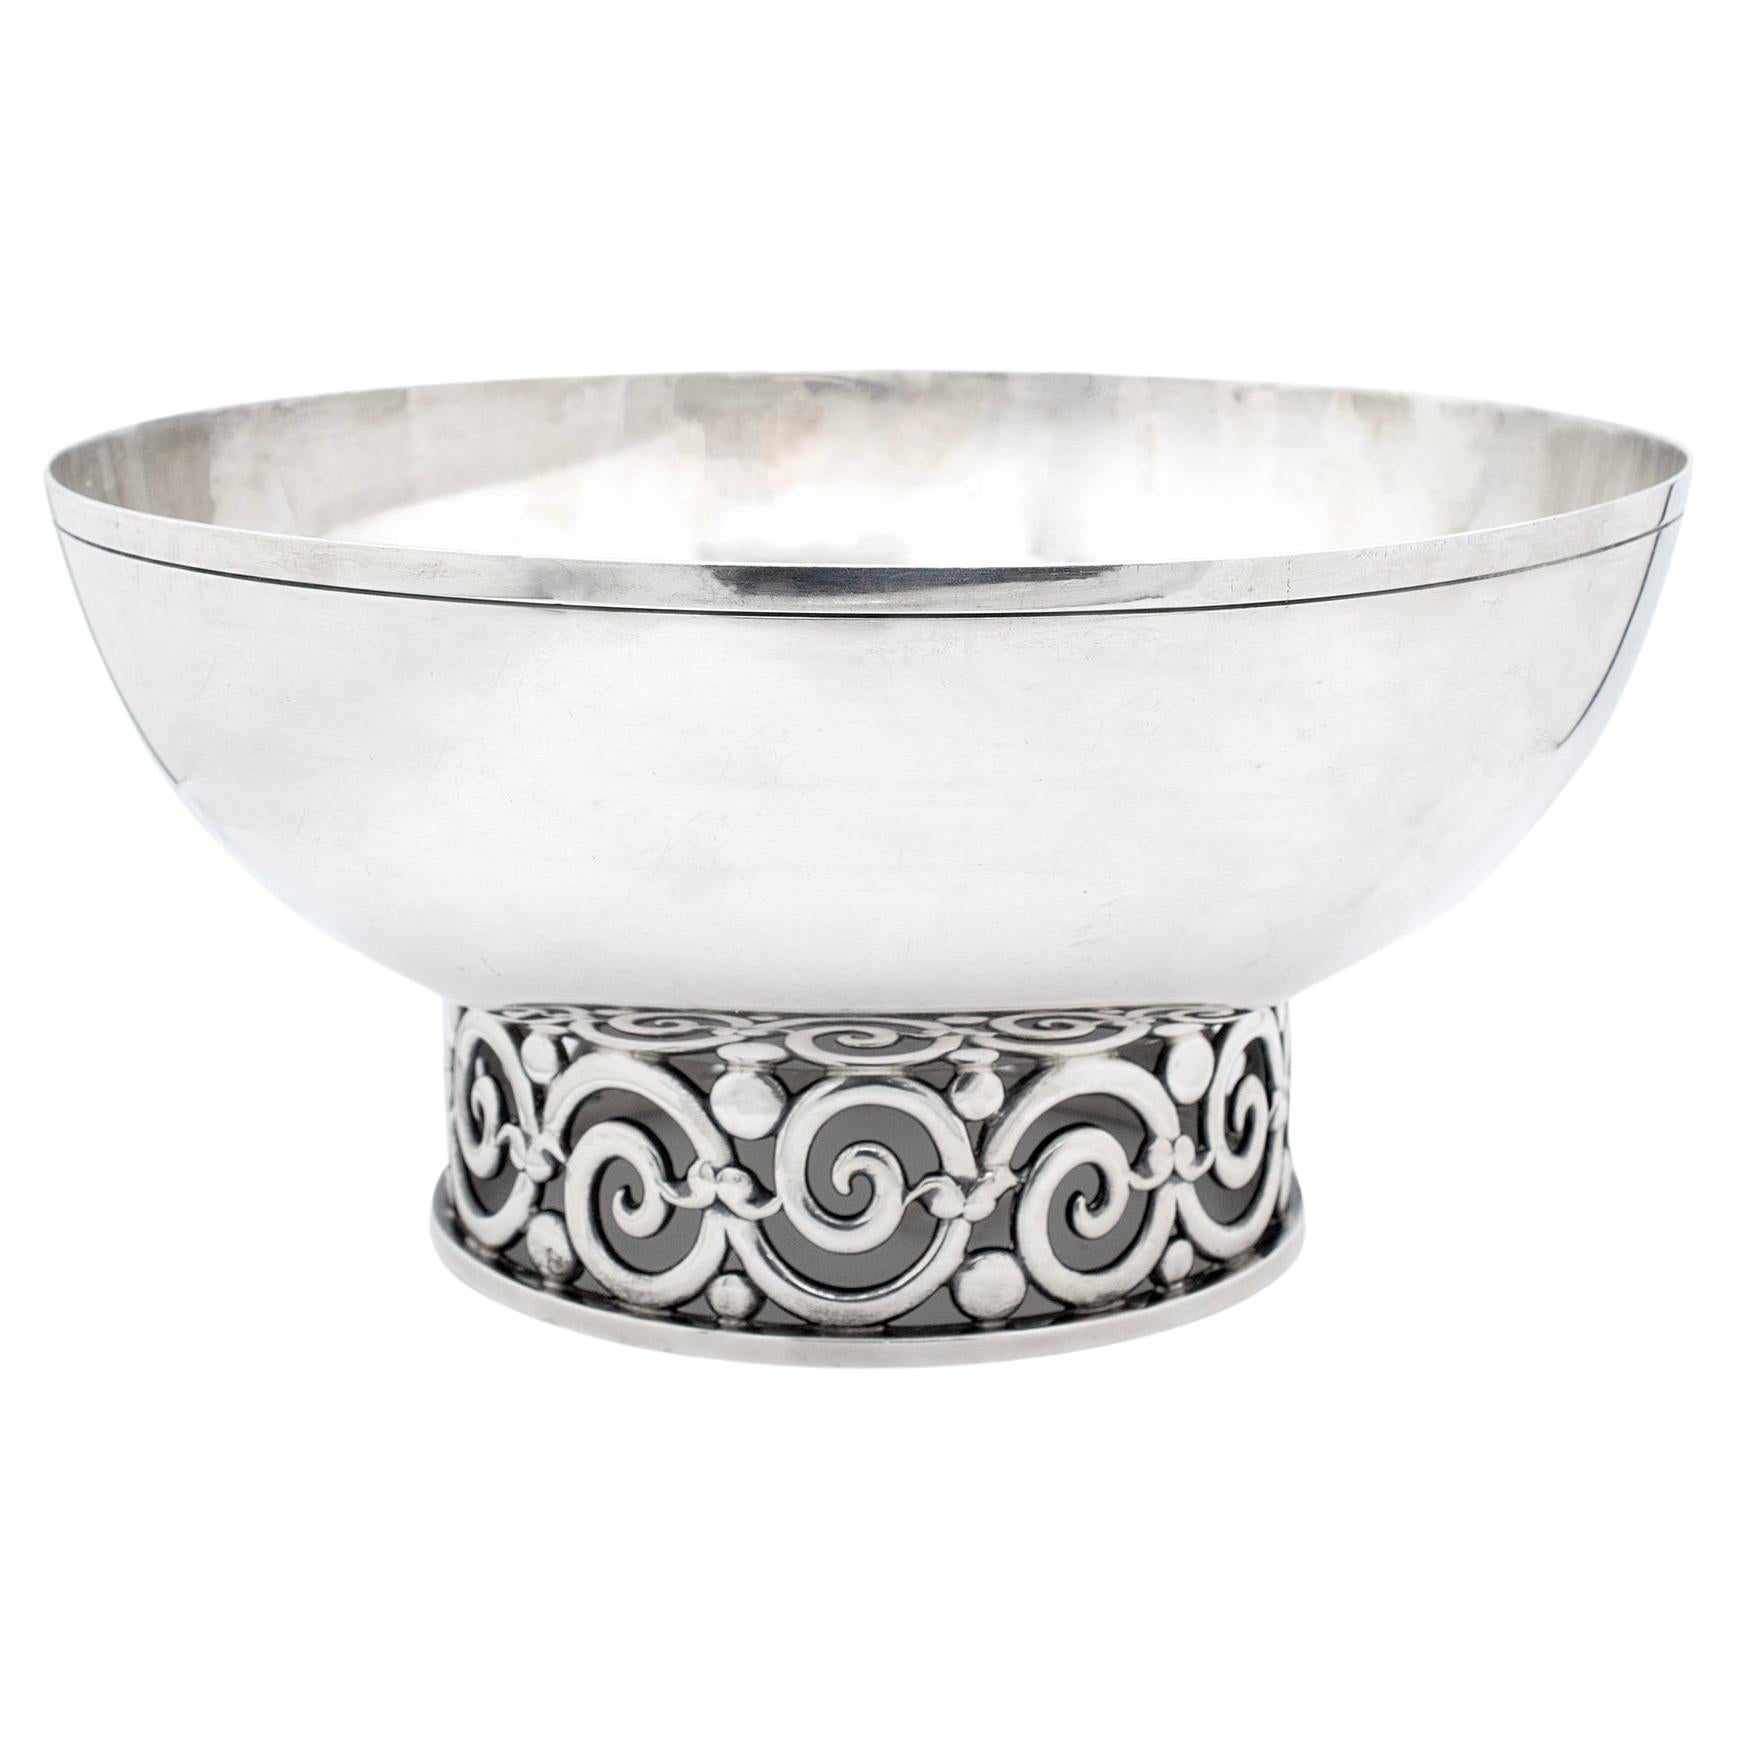 Vintage Mid-Century Tiffany & Co. Makers Sterling Silver Modernist Footed Bowl For Sale